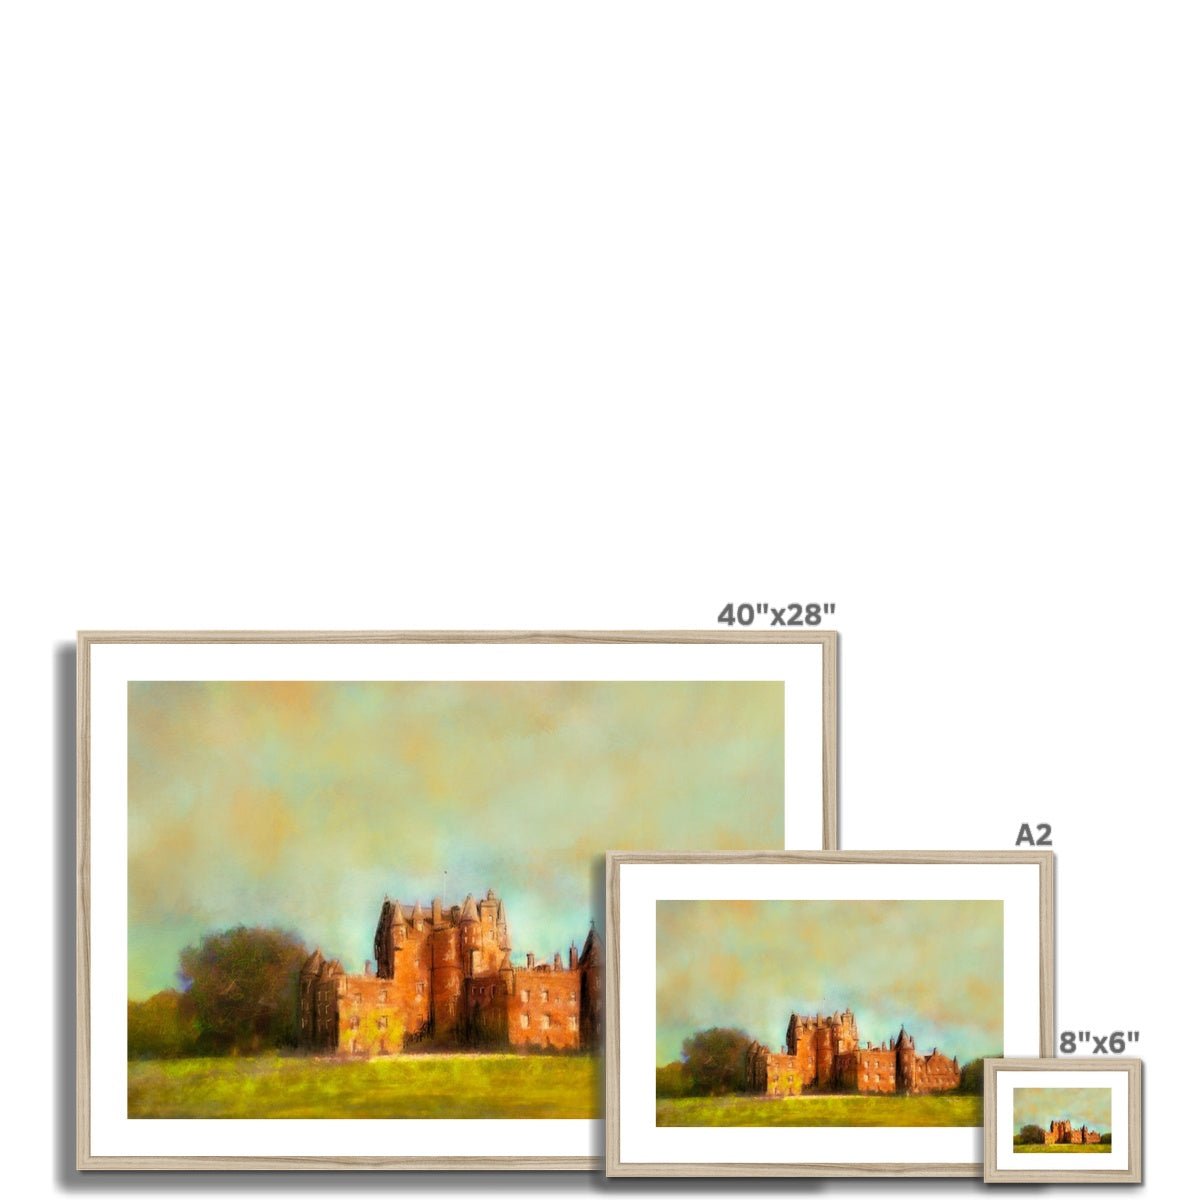 Glamis Castle Painting | Framed & Mounted Prints From Scotland-Framed & Mounted Prints-Scottish Castles Art Gallery-Paintings, Prints, Homeware, Art Gifts From Scotland By Scottish Artist Kevin Hunter